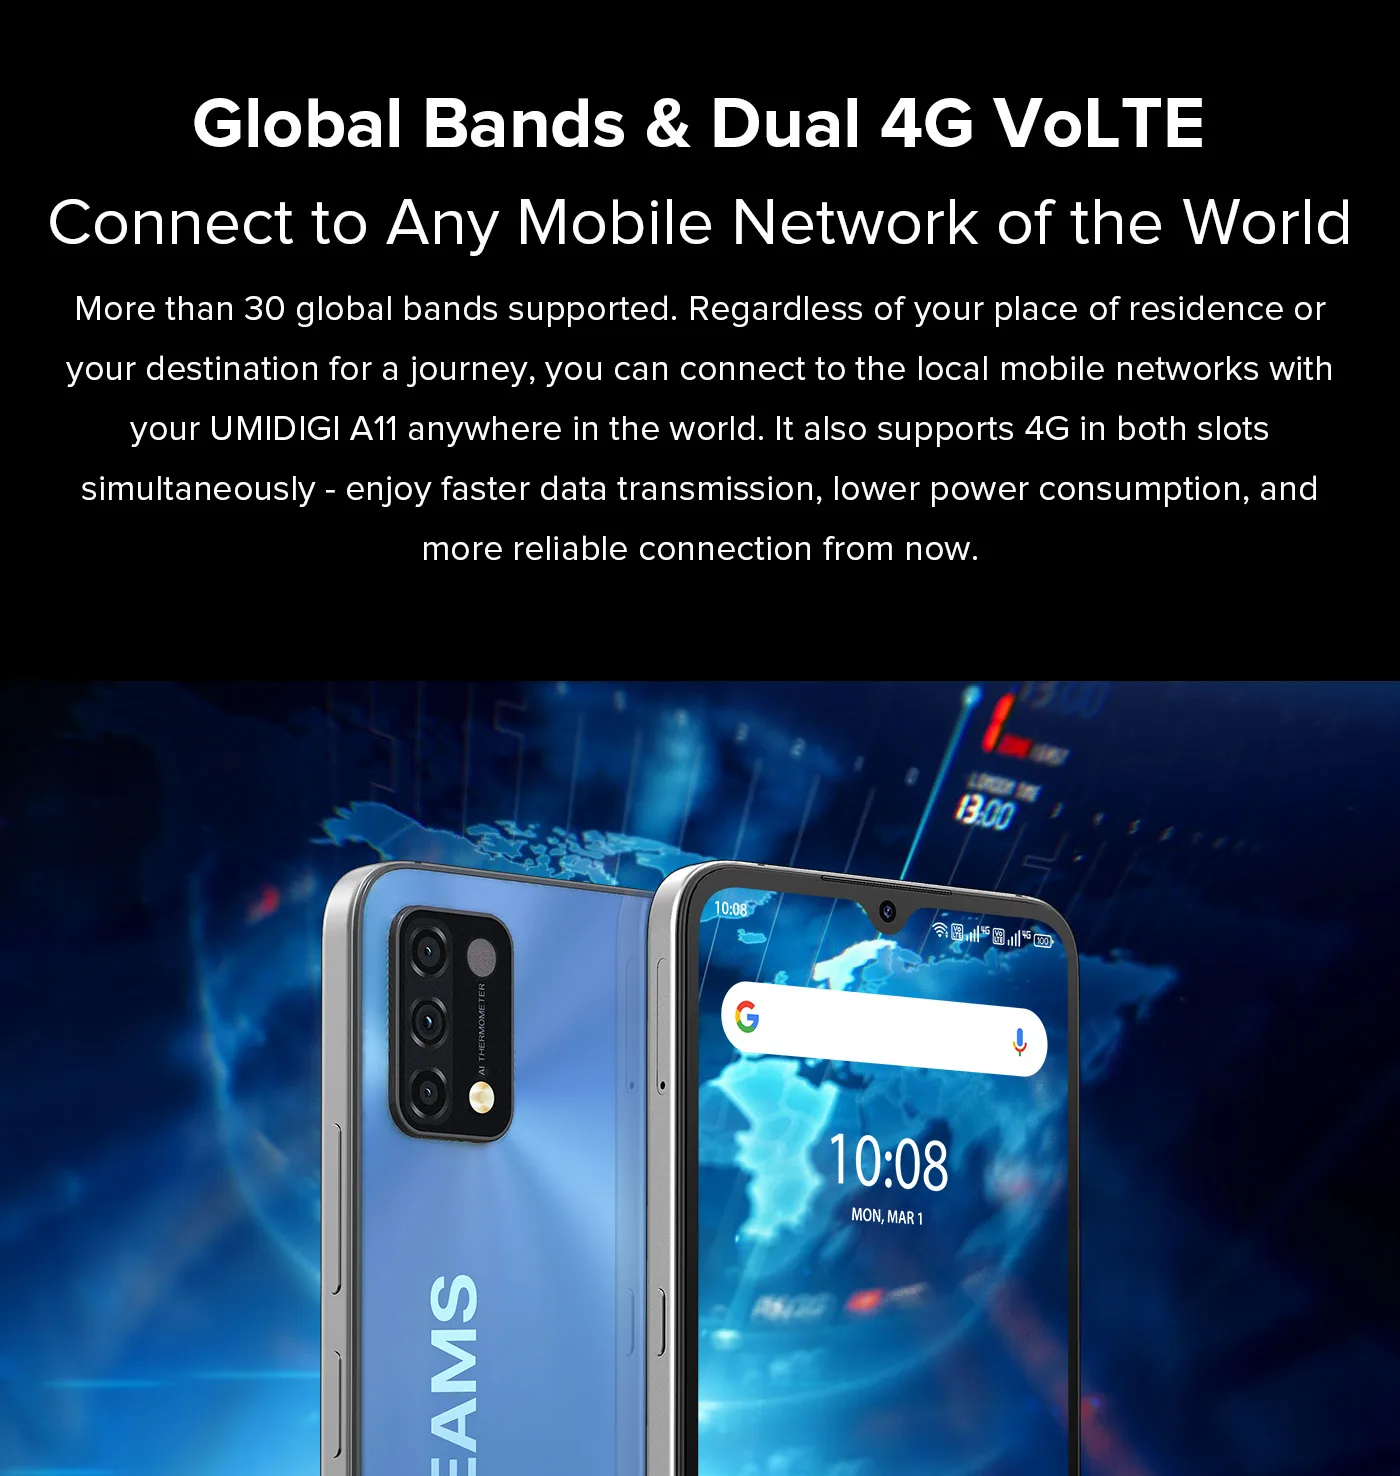 android cell phones for sale UMIDIGI A11 Android 11 NEW Global Version 4GB+128GB 3GB+64GB Smartphone Helio G25 6.53" HD+16MP AI Triple Camera 5150mAh tmobile android phones